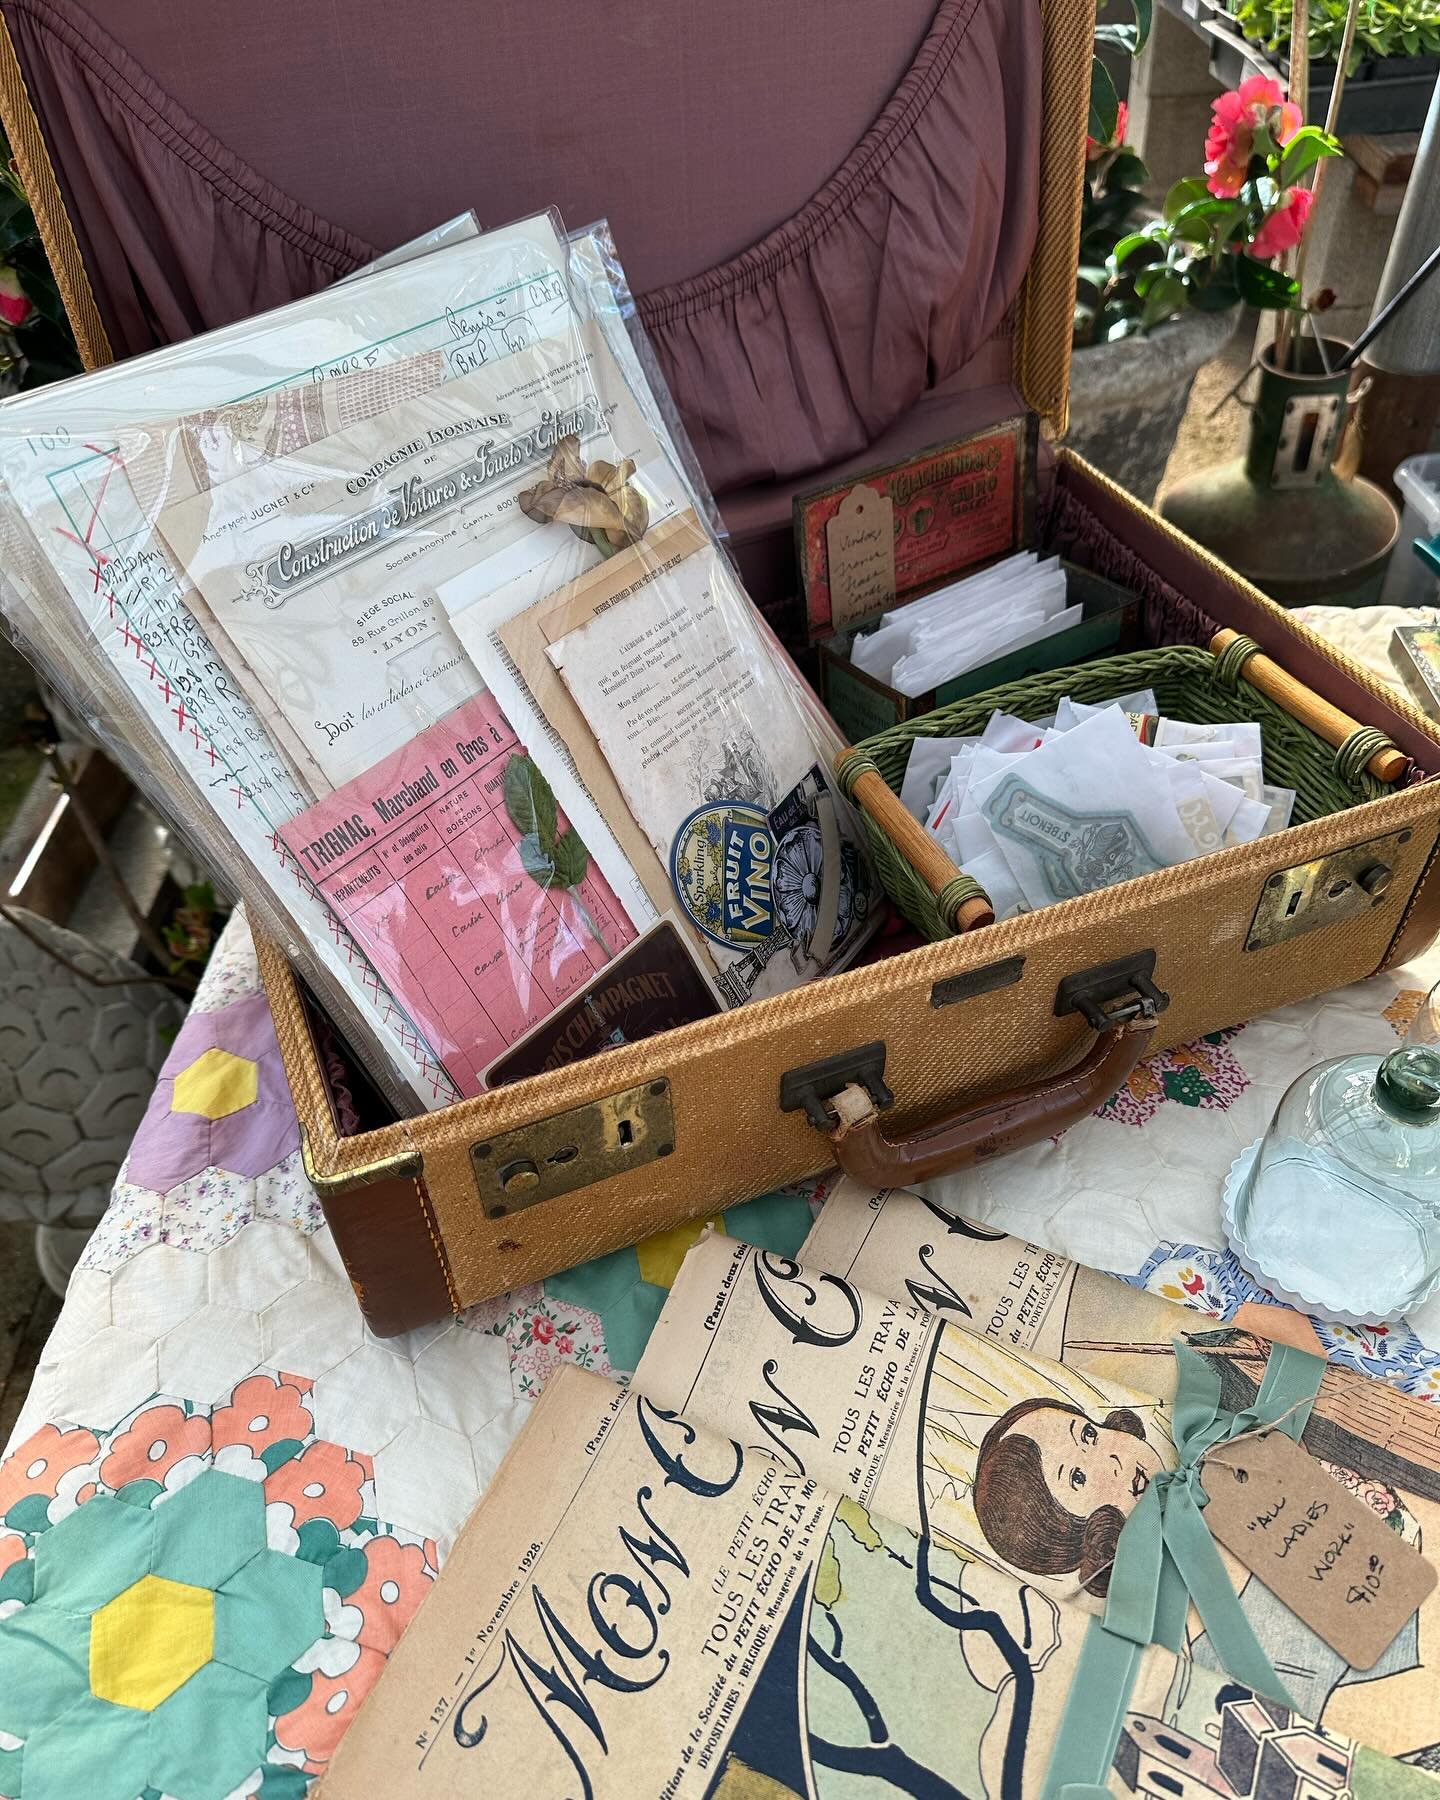 Only thing missing is you! ❤️🇫🇷❤️ Come see me at the @creatorsandcuratorsmarket April In Paris market!! Today from 10-3. I&rsquo;ve brought tons of vintage French papers and ephemera from my personal collection. I&rsquo;m ready to answer all of you